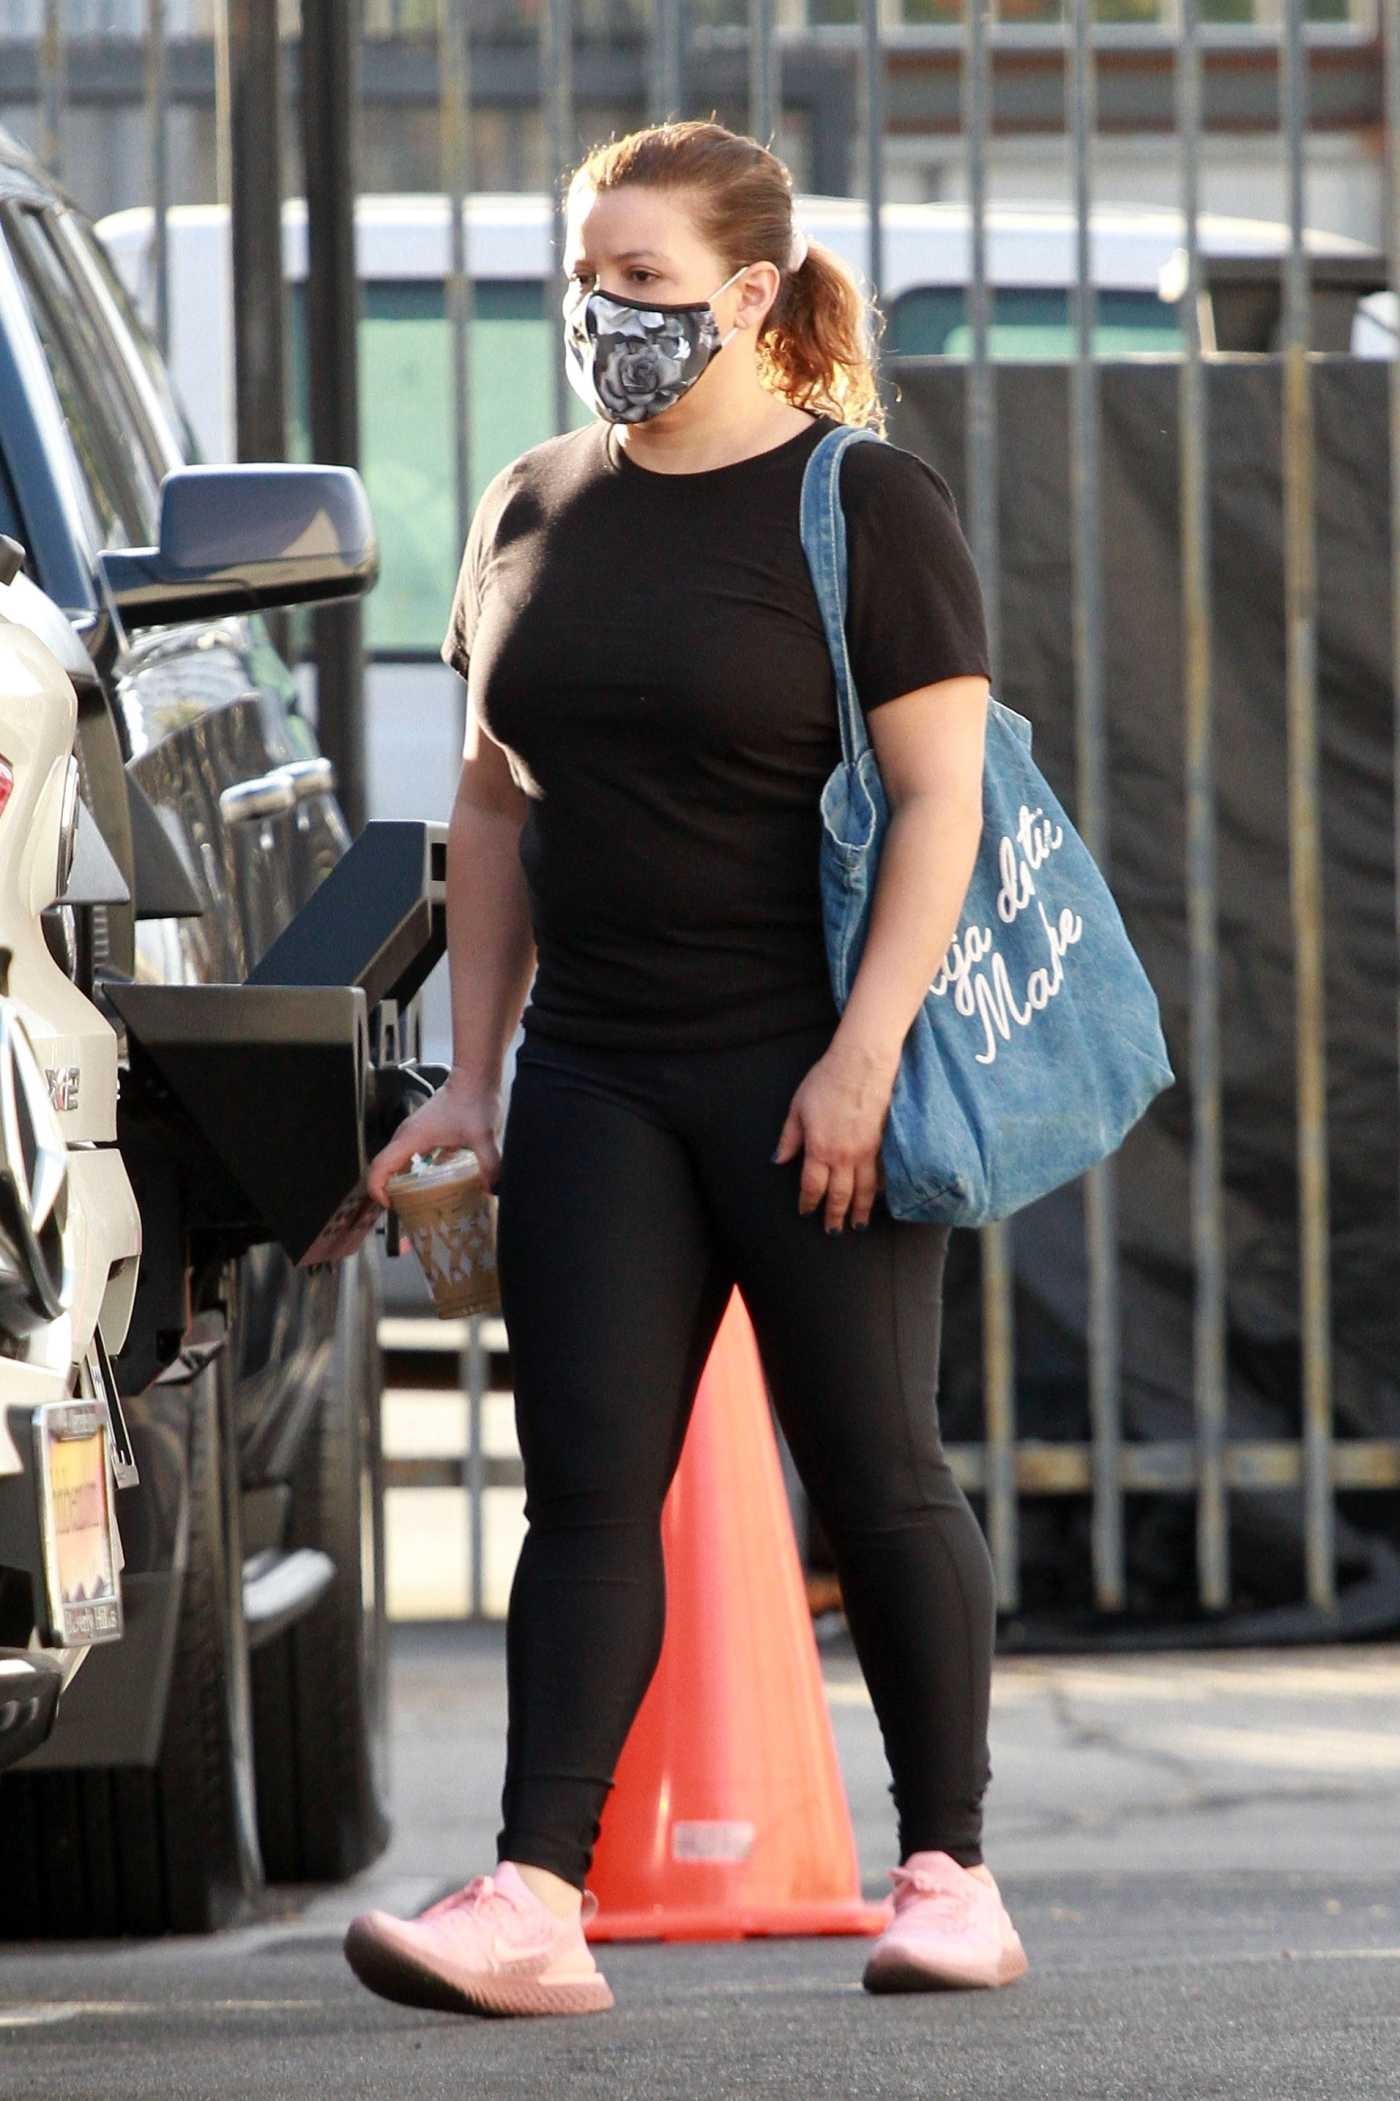 Justina Machado in a Black Tee Arrives at the DWTS Studio in Los Angeles 11/21/2020